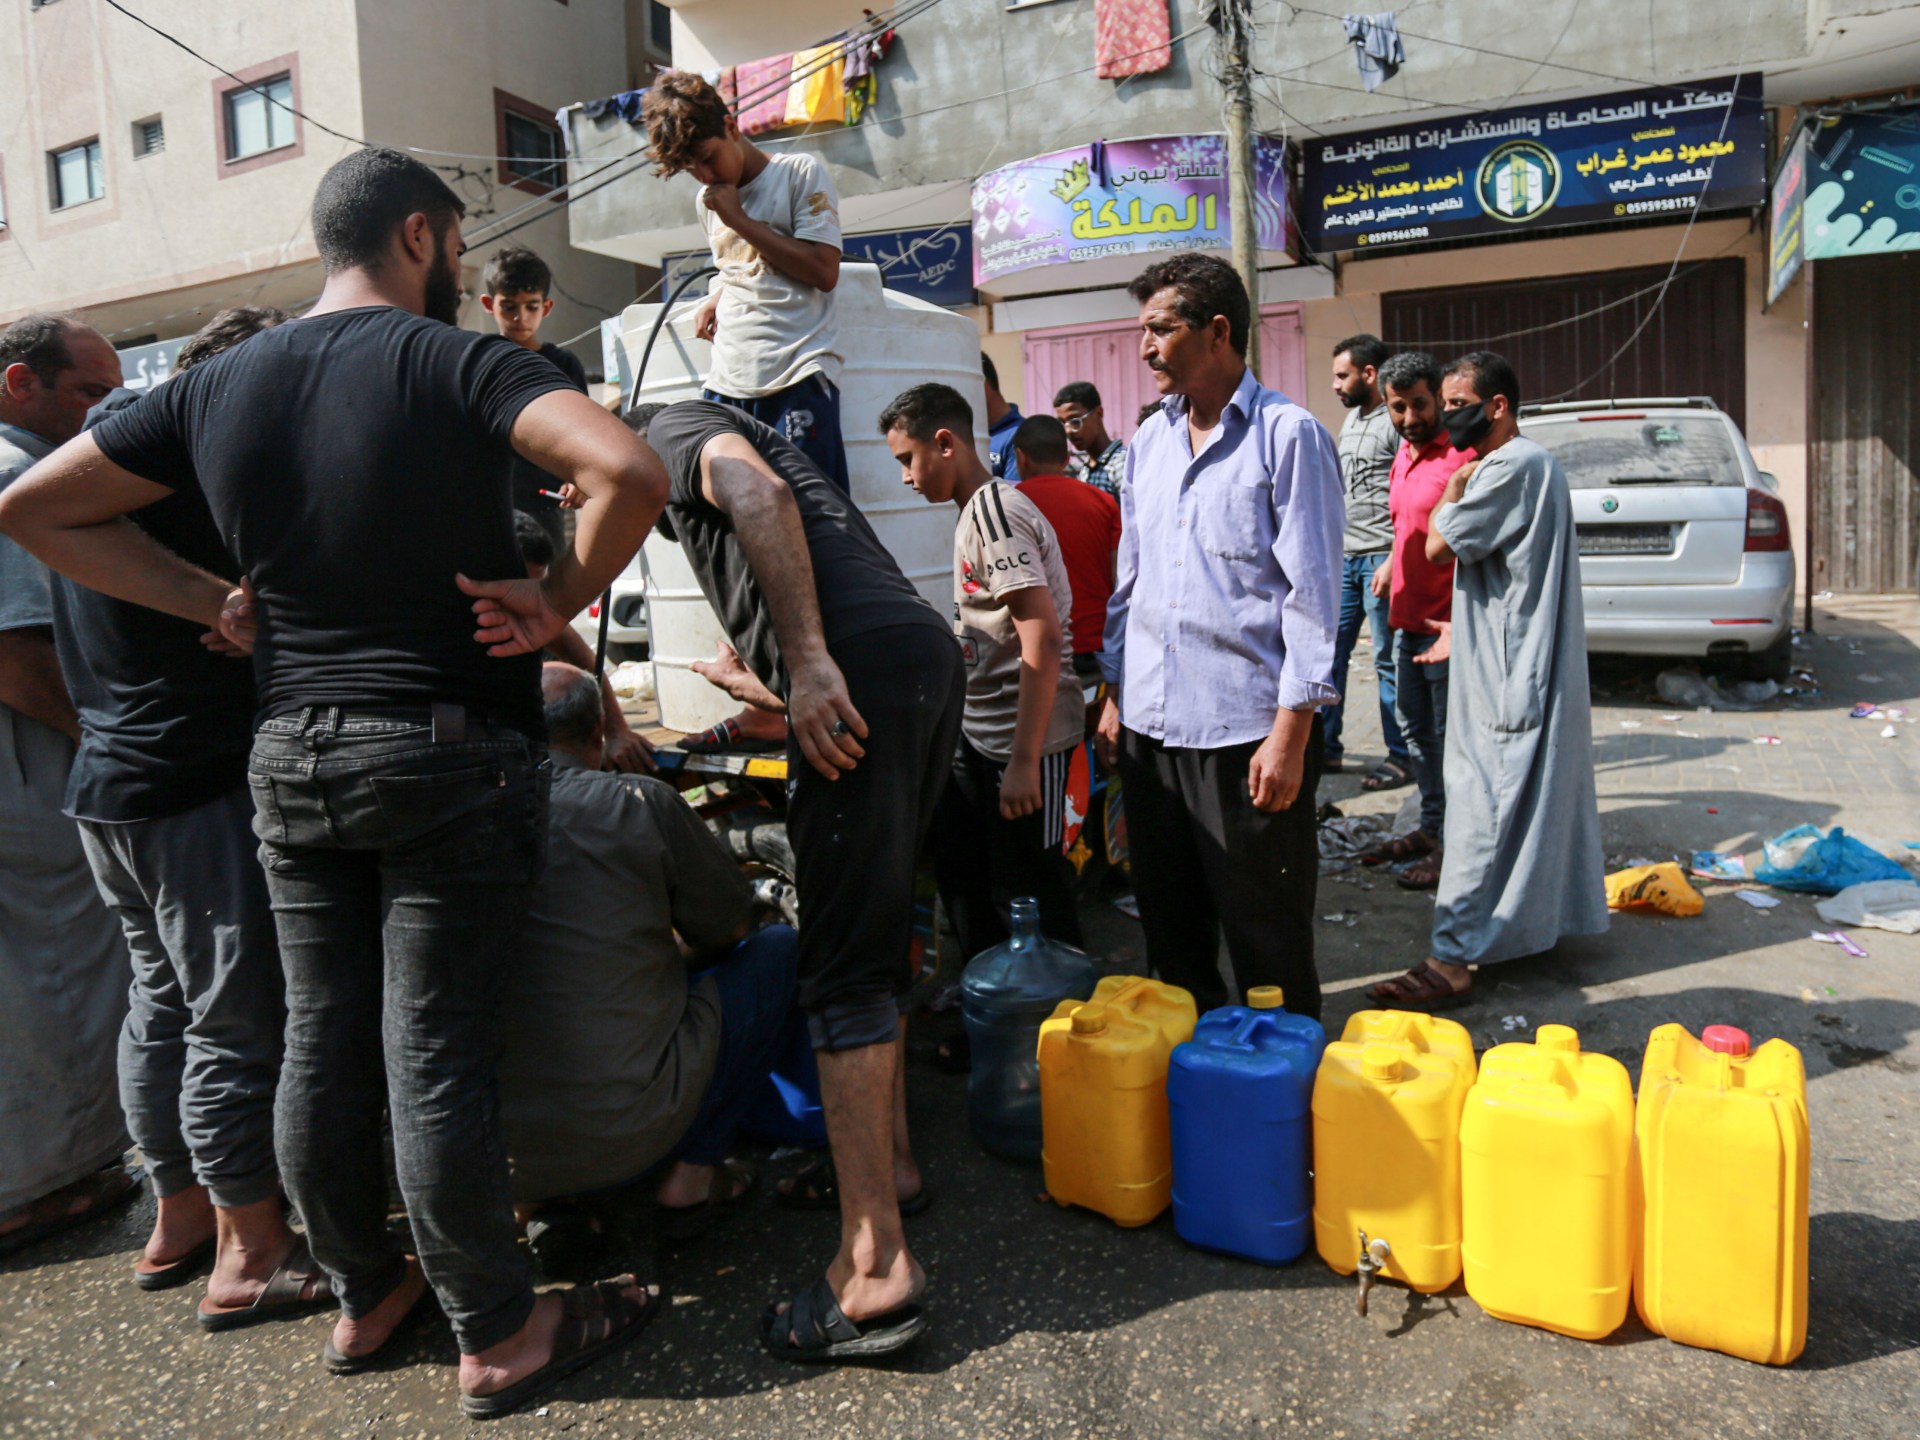 Shopping, queuing for bread, looking for water: Life in Gaza City continues